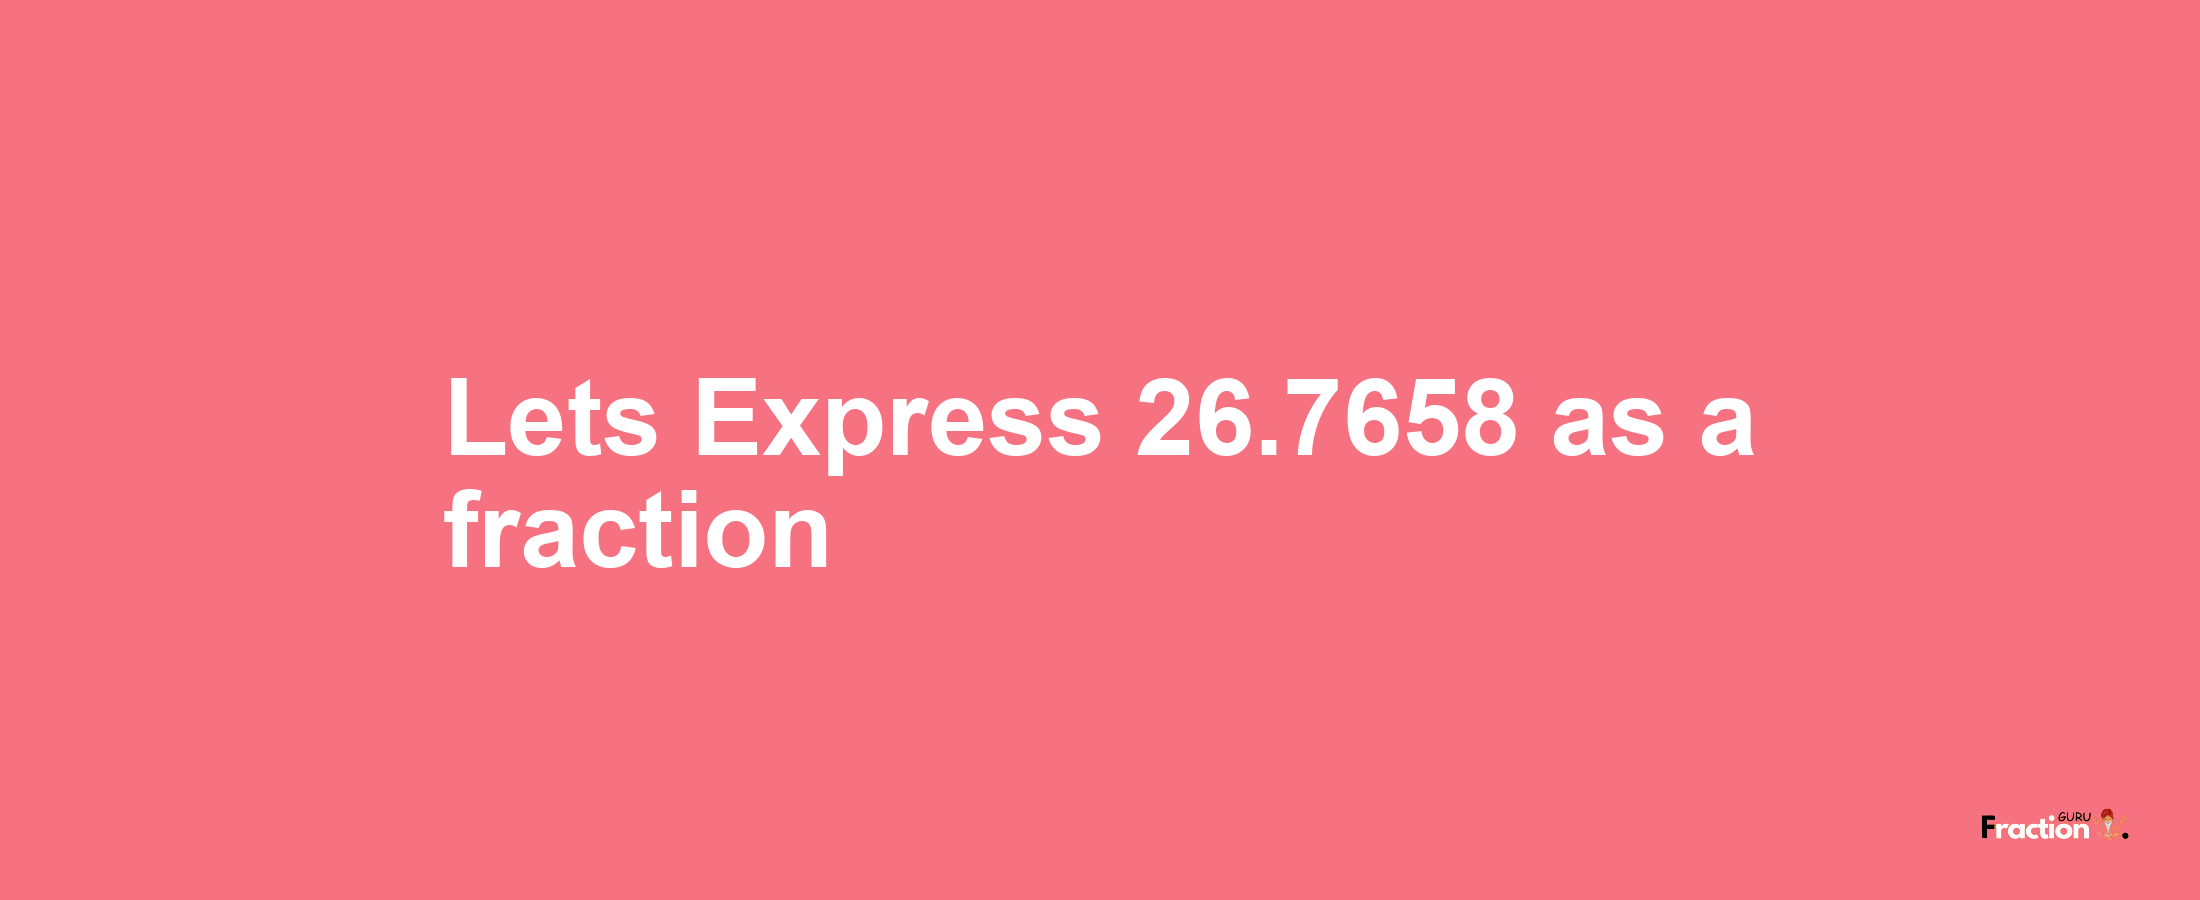 Lets Express 26.7658 as afraction